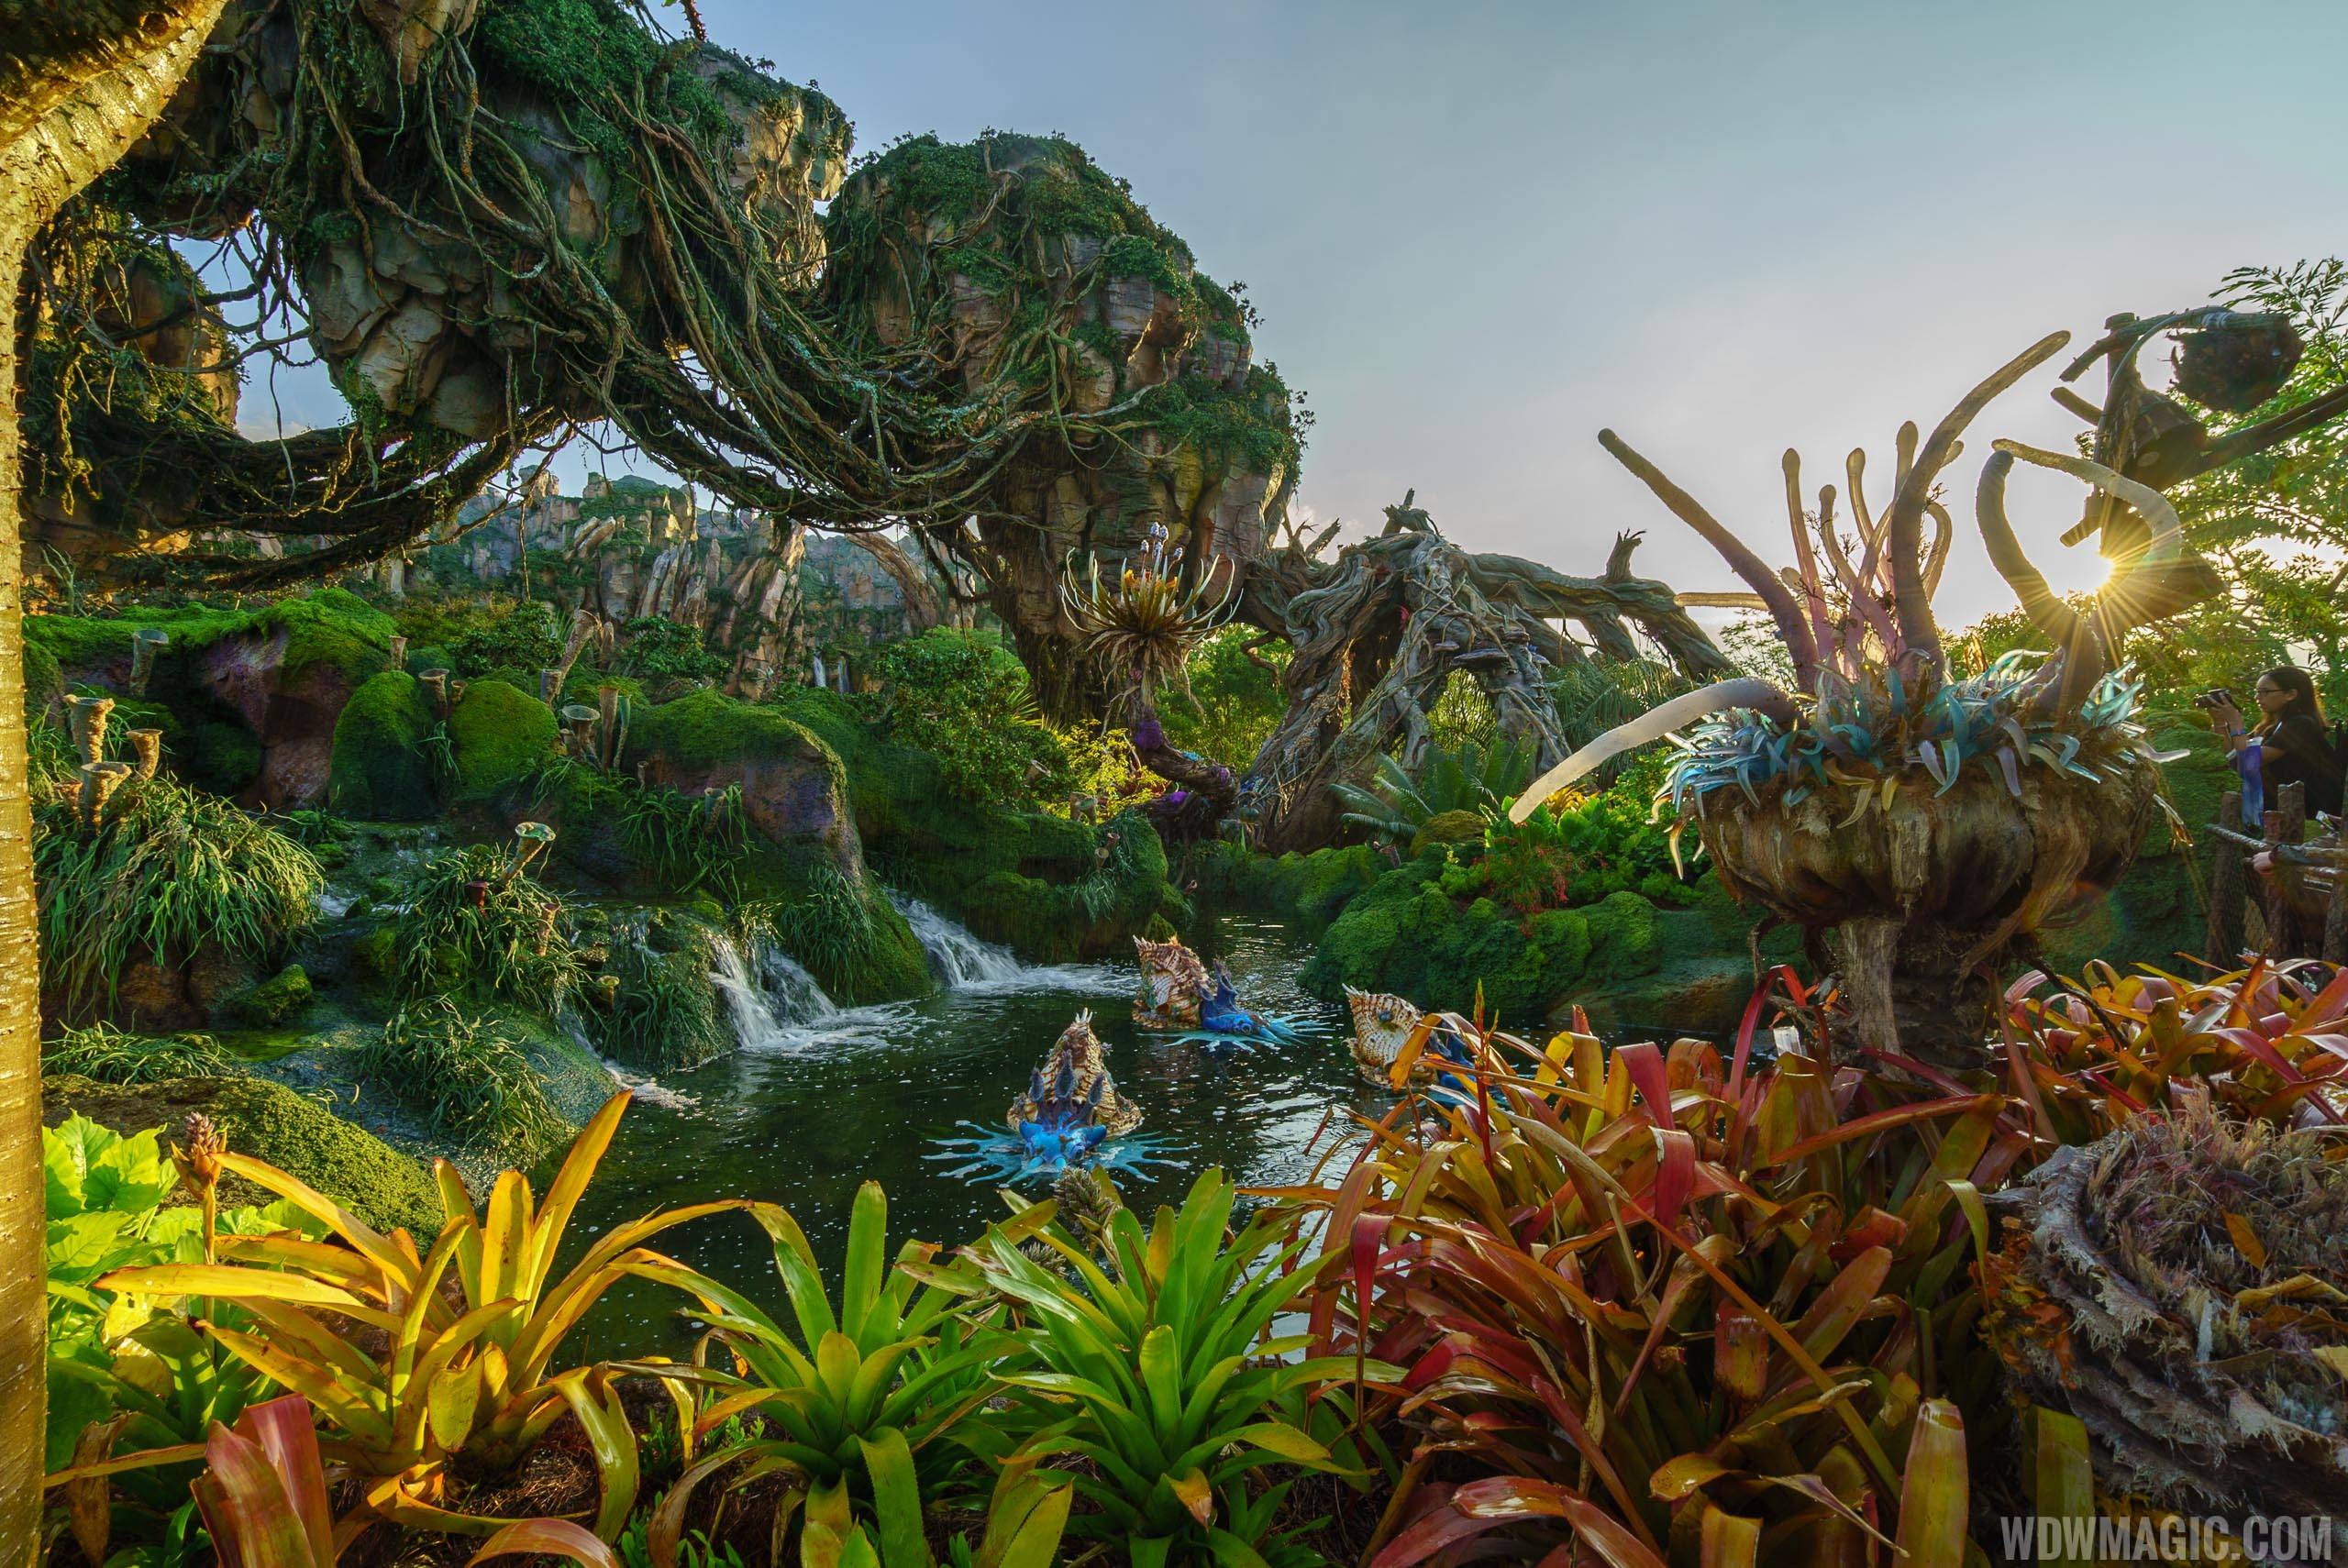 AVATAR Flight of Passage has a 2.5 hour wait this evening